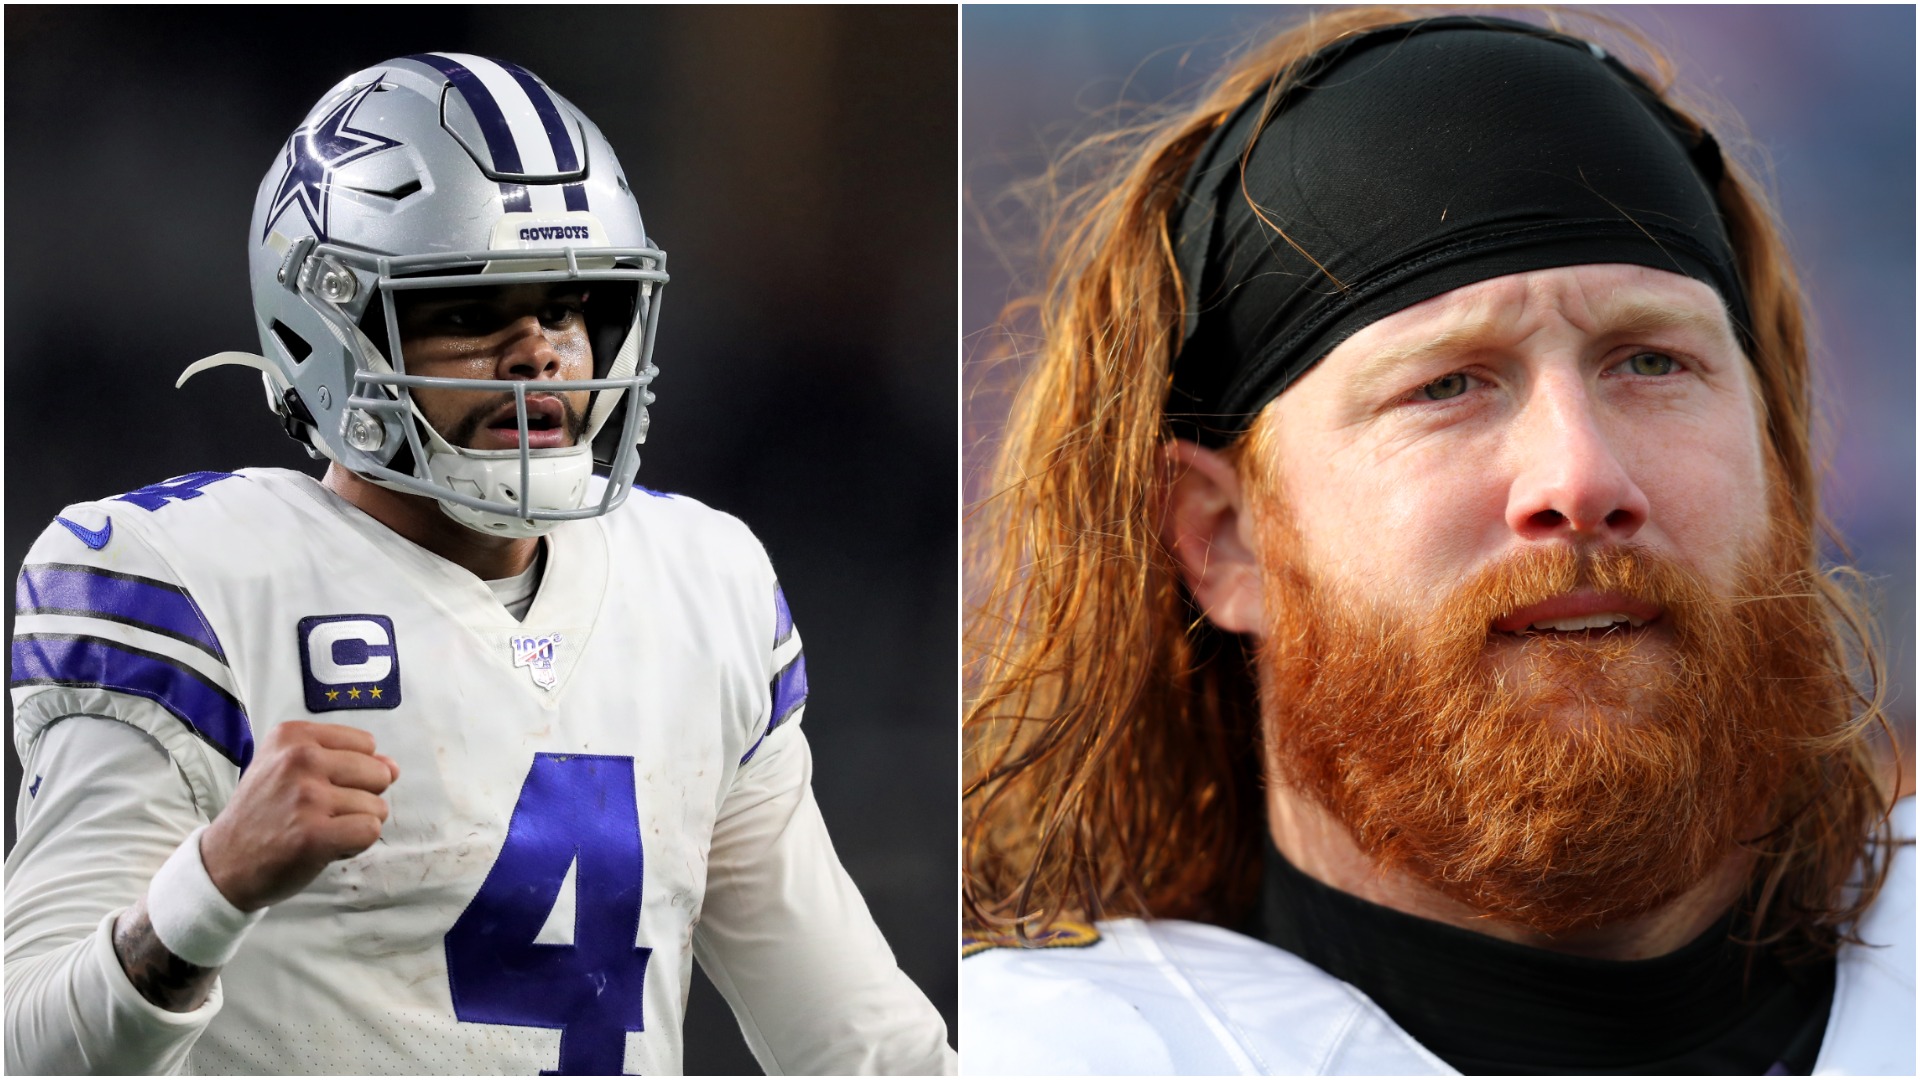 On Sunday, Dak Prescott and Hayden Hurst put aside their differences to focus on something bigger than football.